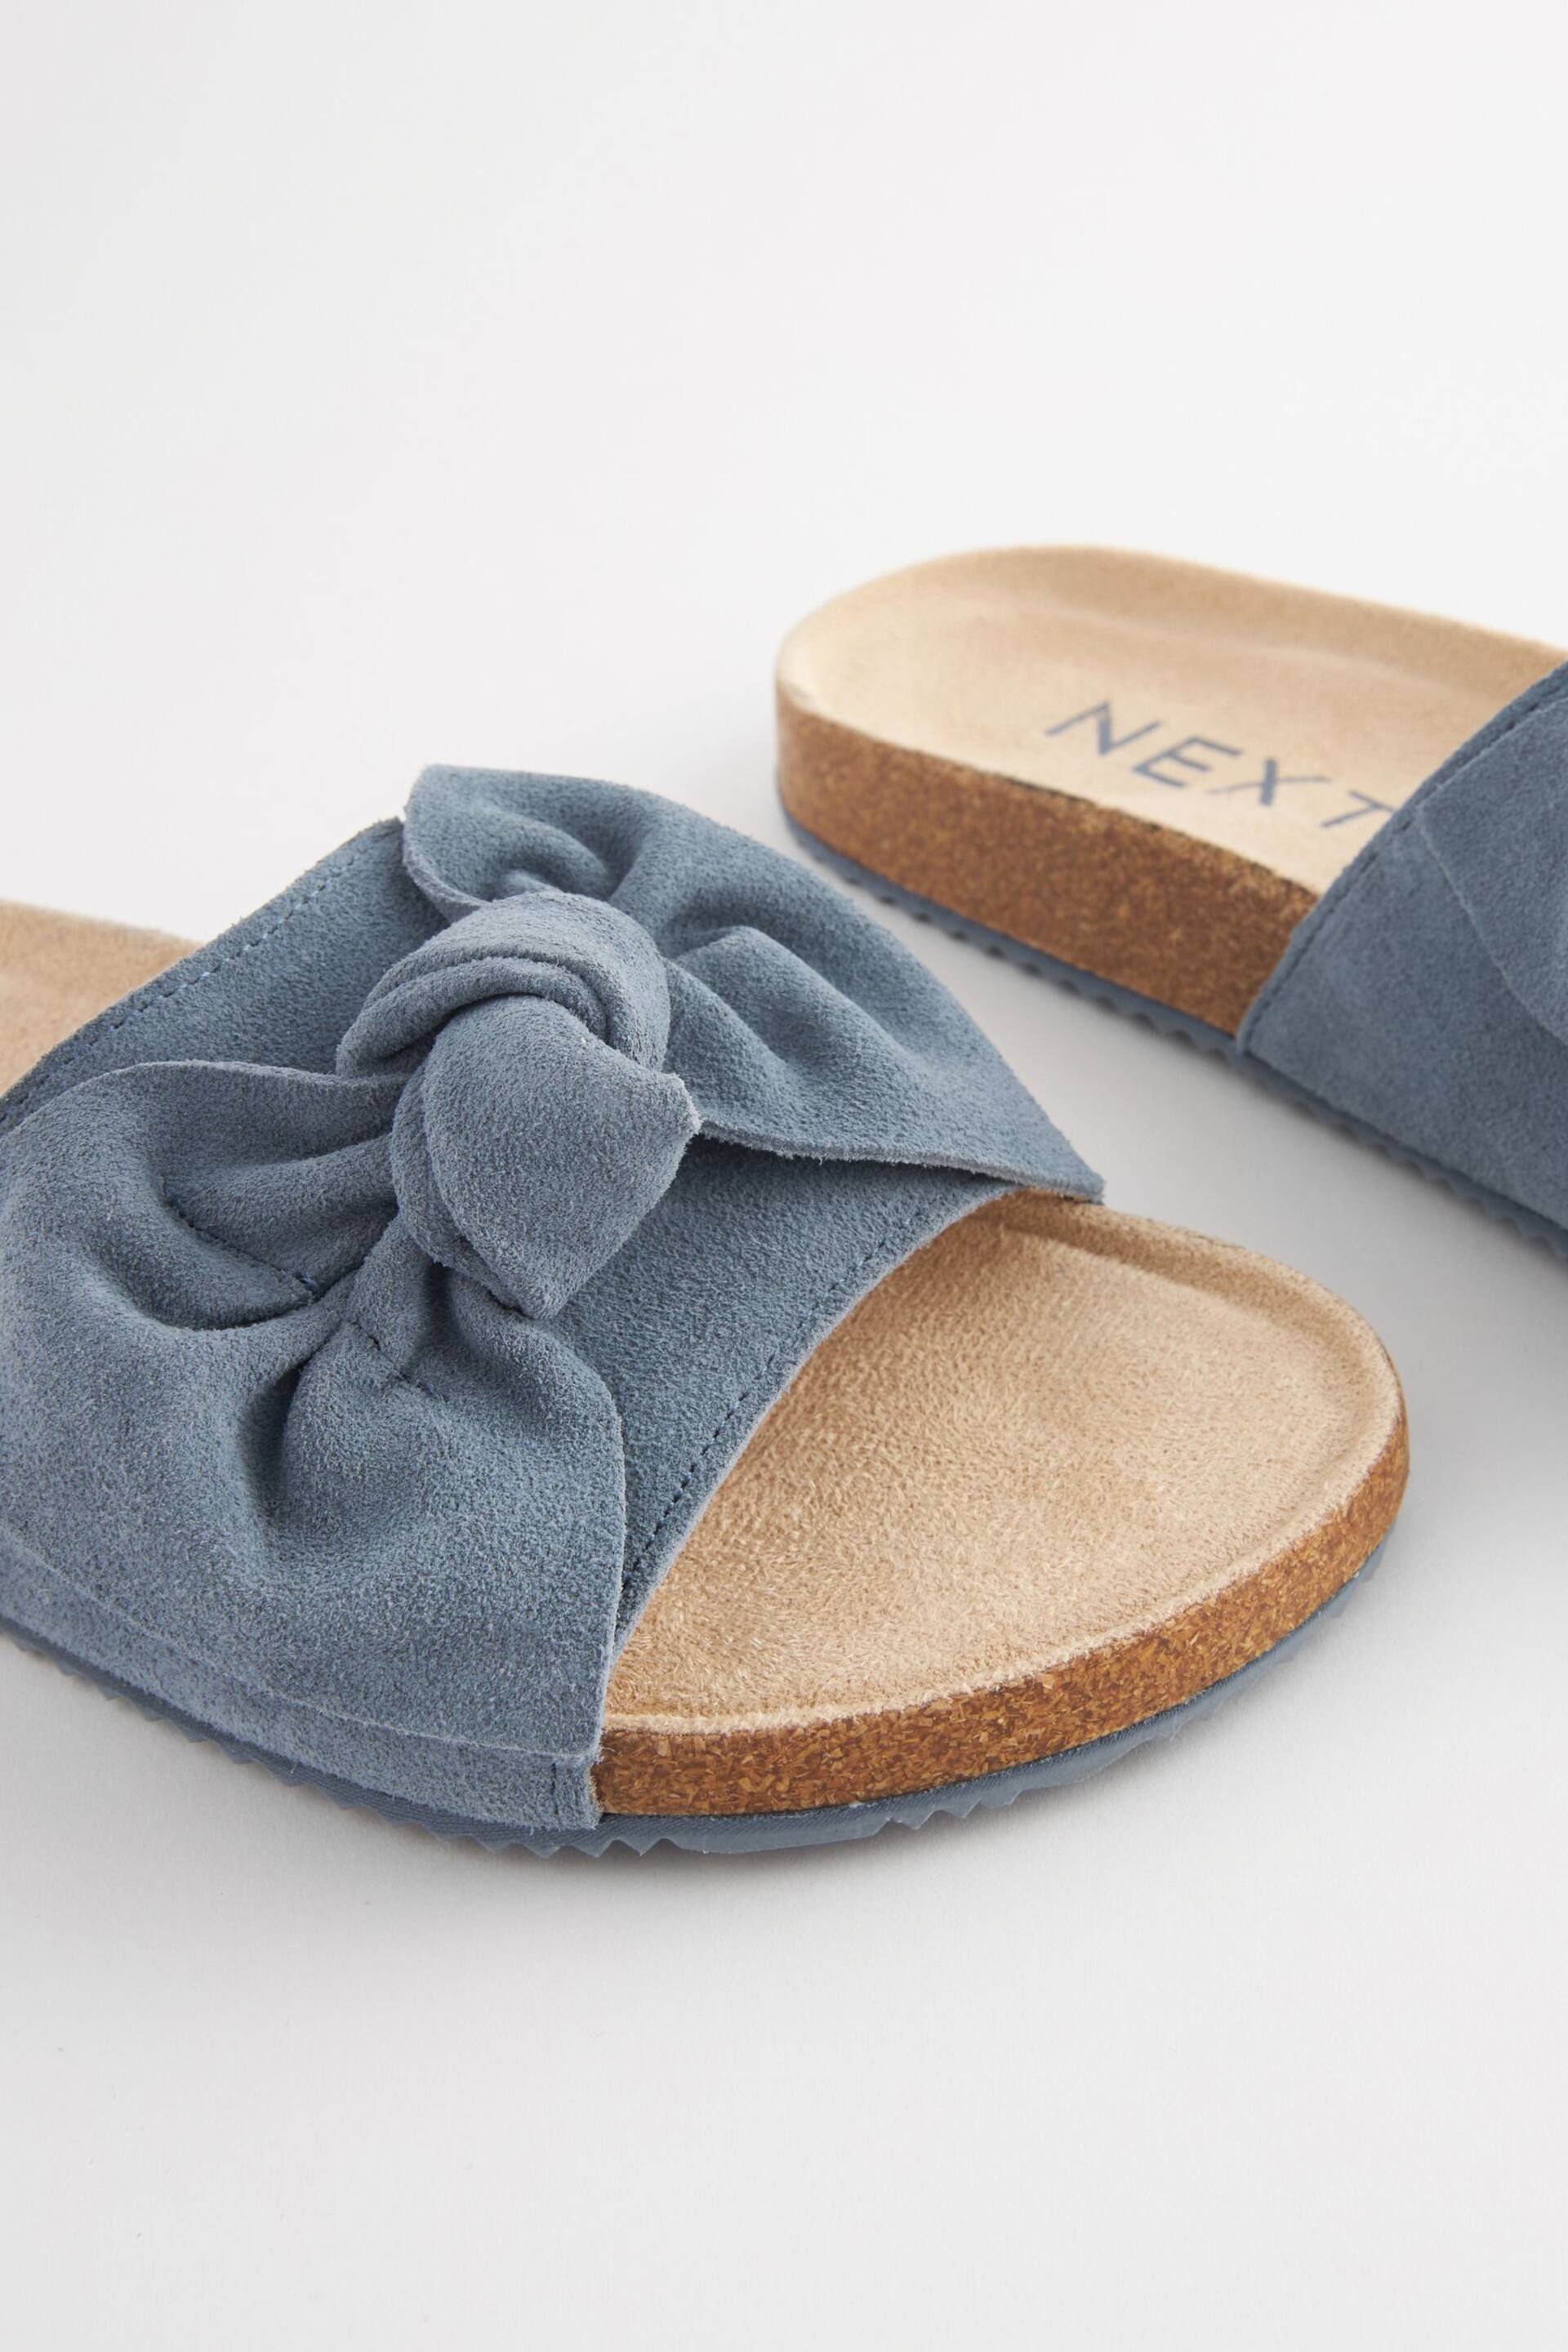 Blue Suede Bow Slider Slippers - Image 5 of 7